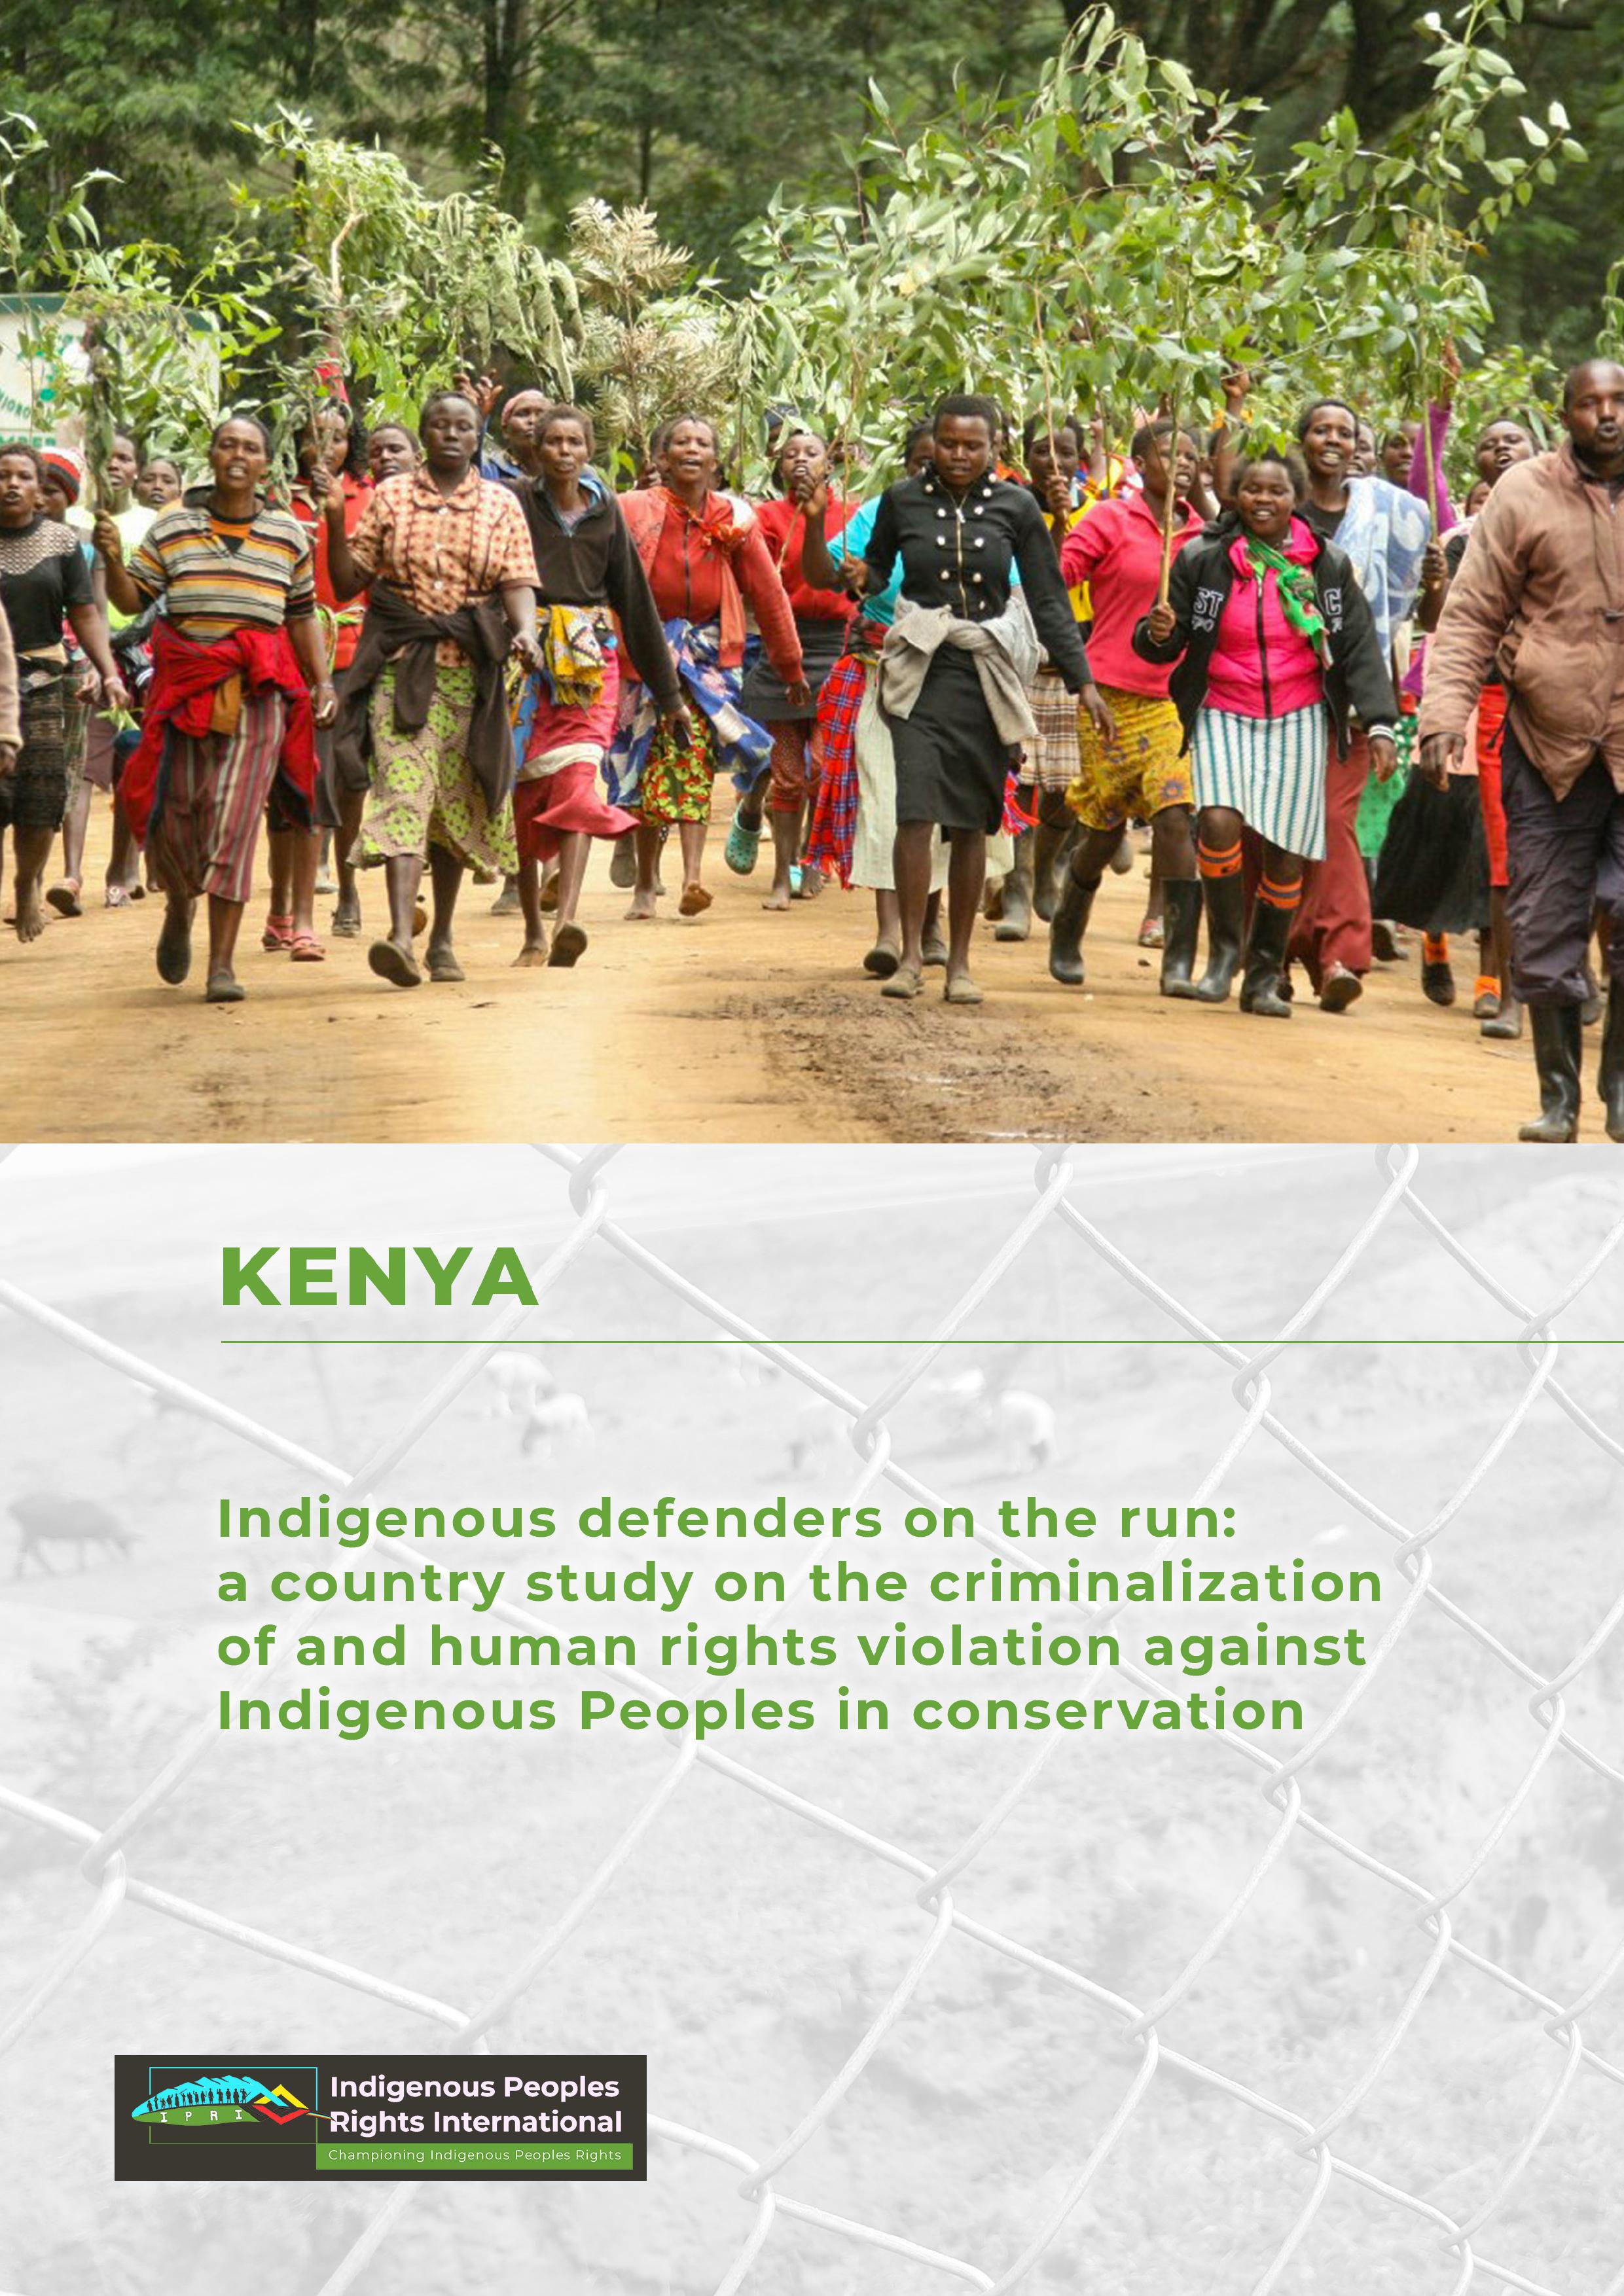 KENYA || Indigenous defenders on the run: a country study on the criminalization of and human rights violation against Indigenous Peoples in conservation